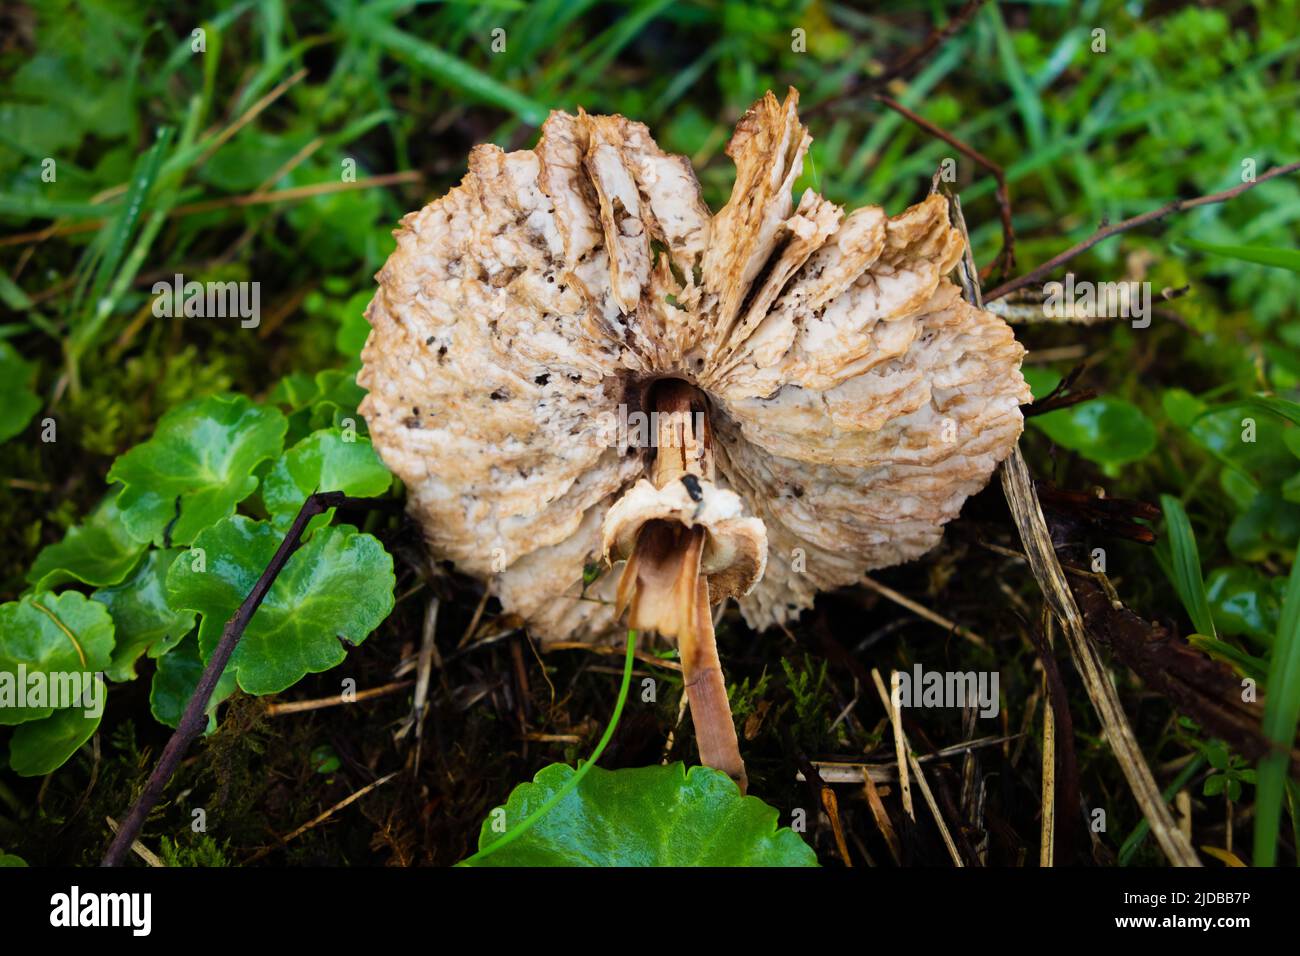 underside of a single dirty white Autumn fungi on a natural green background Stock Photo